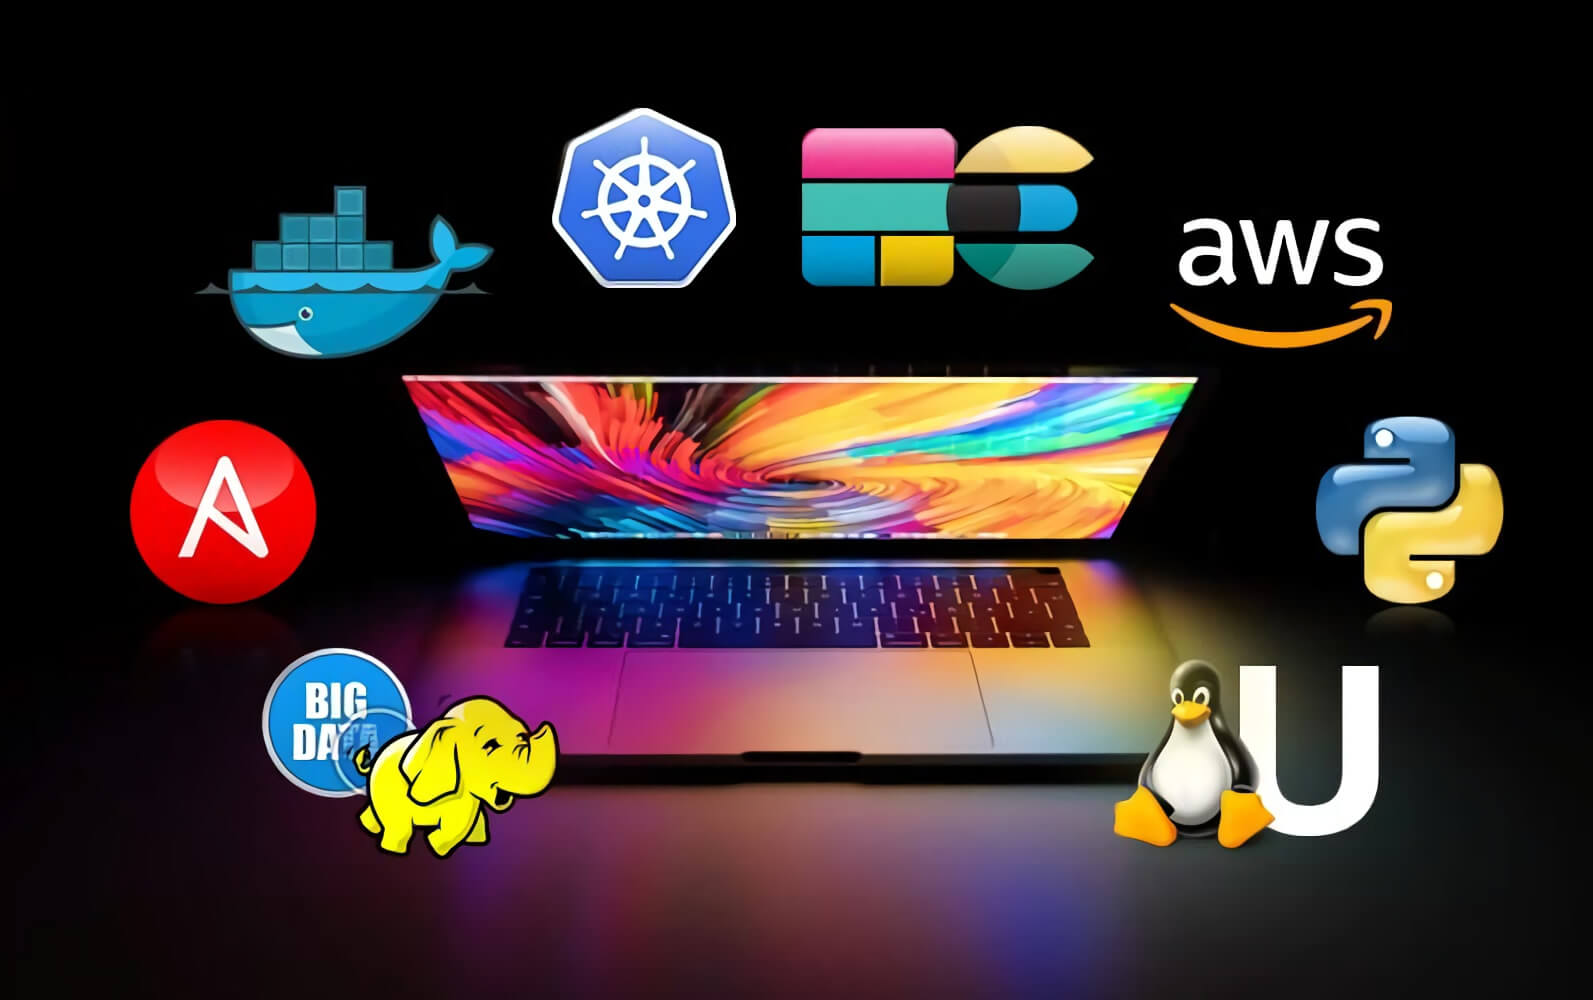 Get trained in DevOps with this massive bundle, currently 96% off